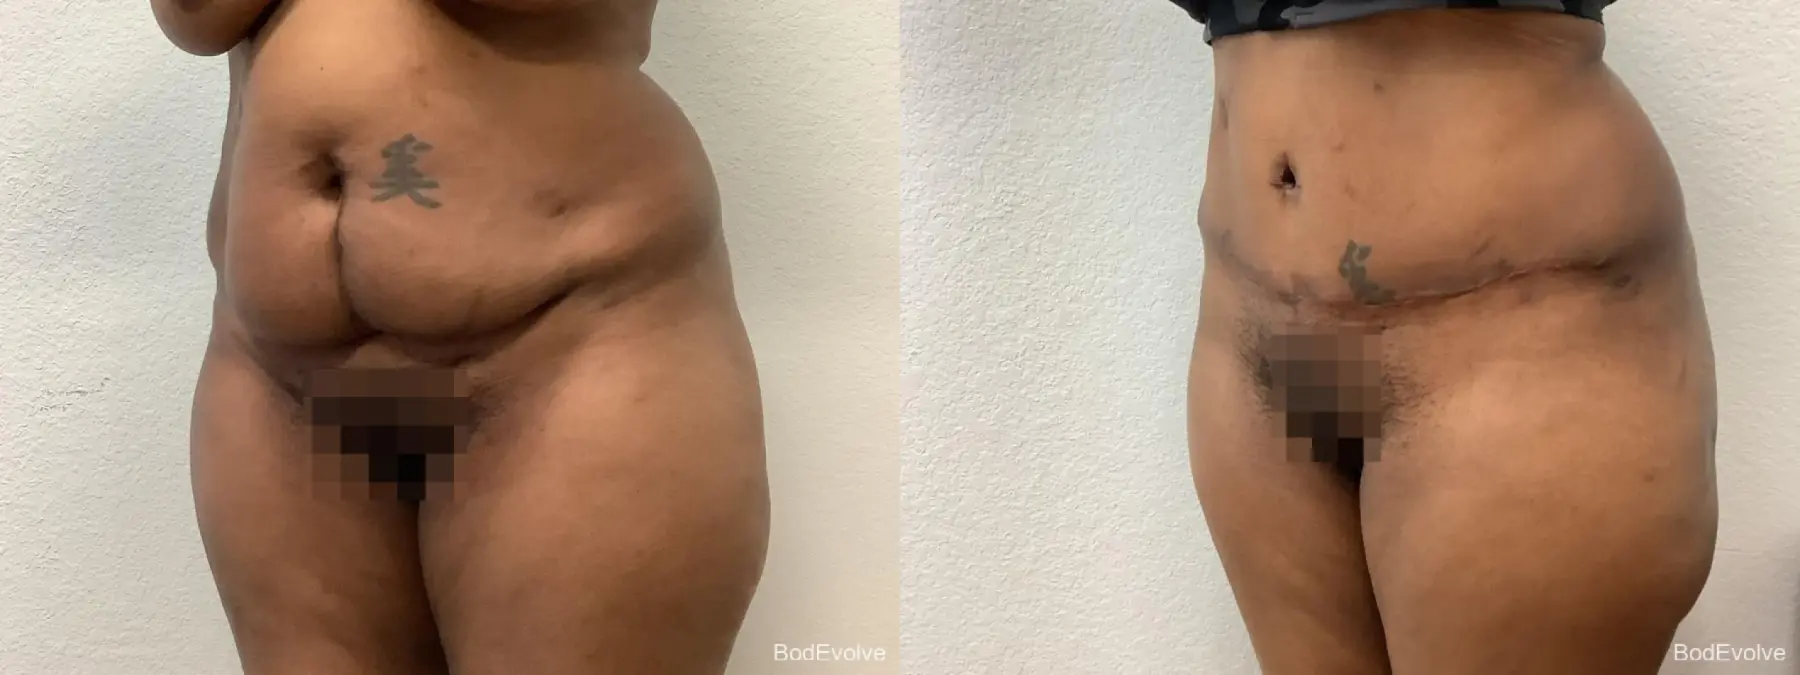 Tummy Tuck: Patient 3 - Before and After 5